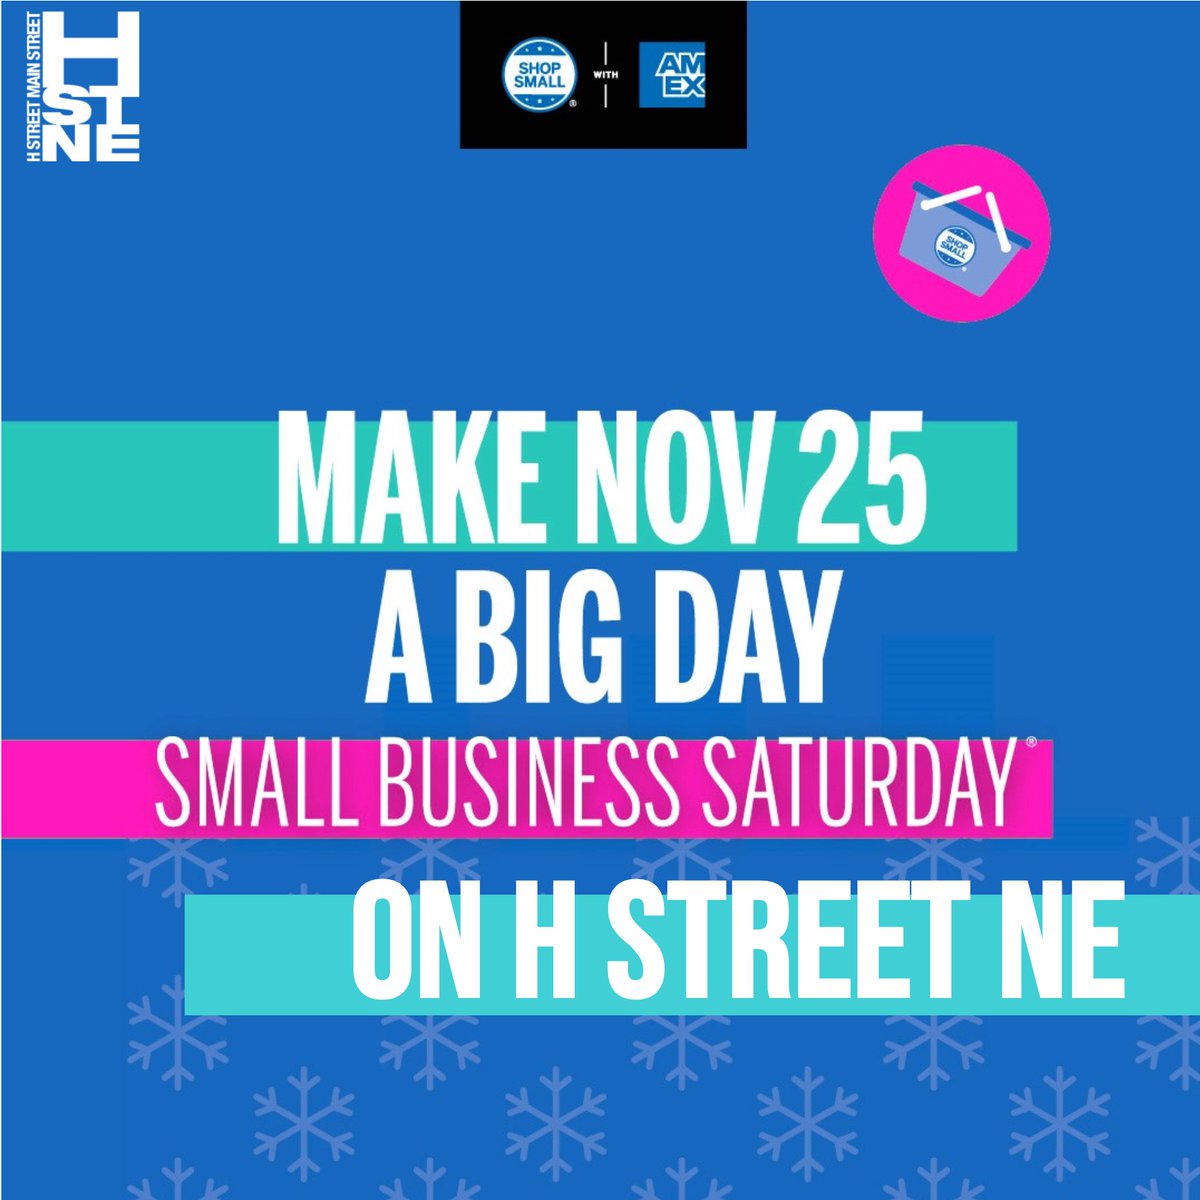 Yes! It is the time of the year again - #SmallBizSat is happening on Saturday Nov 25 –   support our  #localbiz – check out all their offerings on our website hstreet.org ! #hstreetstrong #ShopSmall #SmallBizSat #AmexSBSChampion #hstreetne #supportyourneighborhood